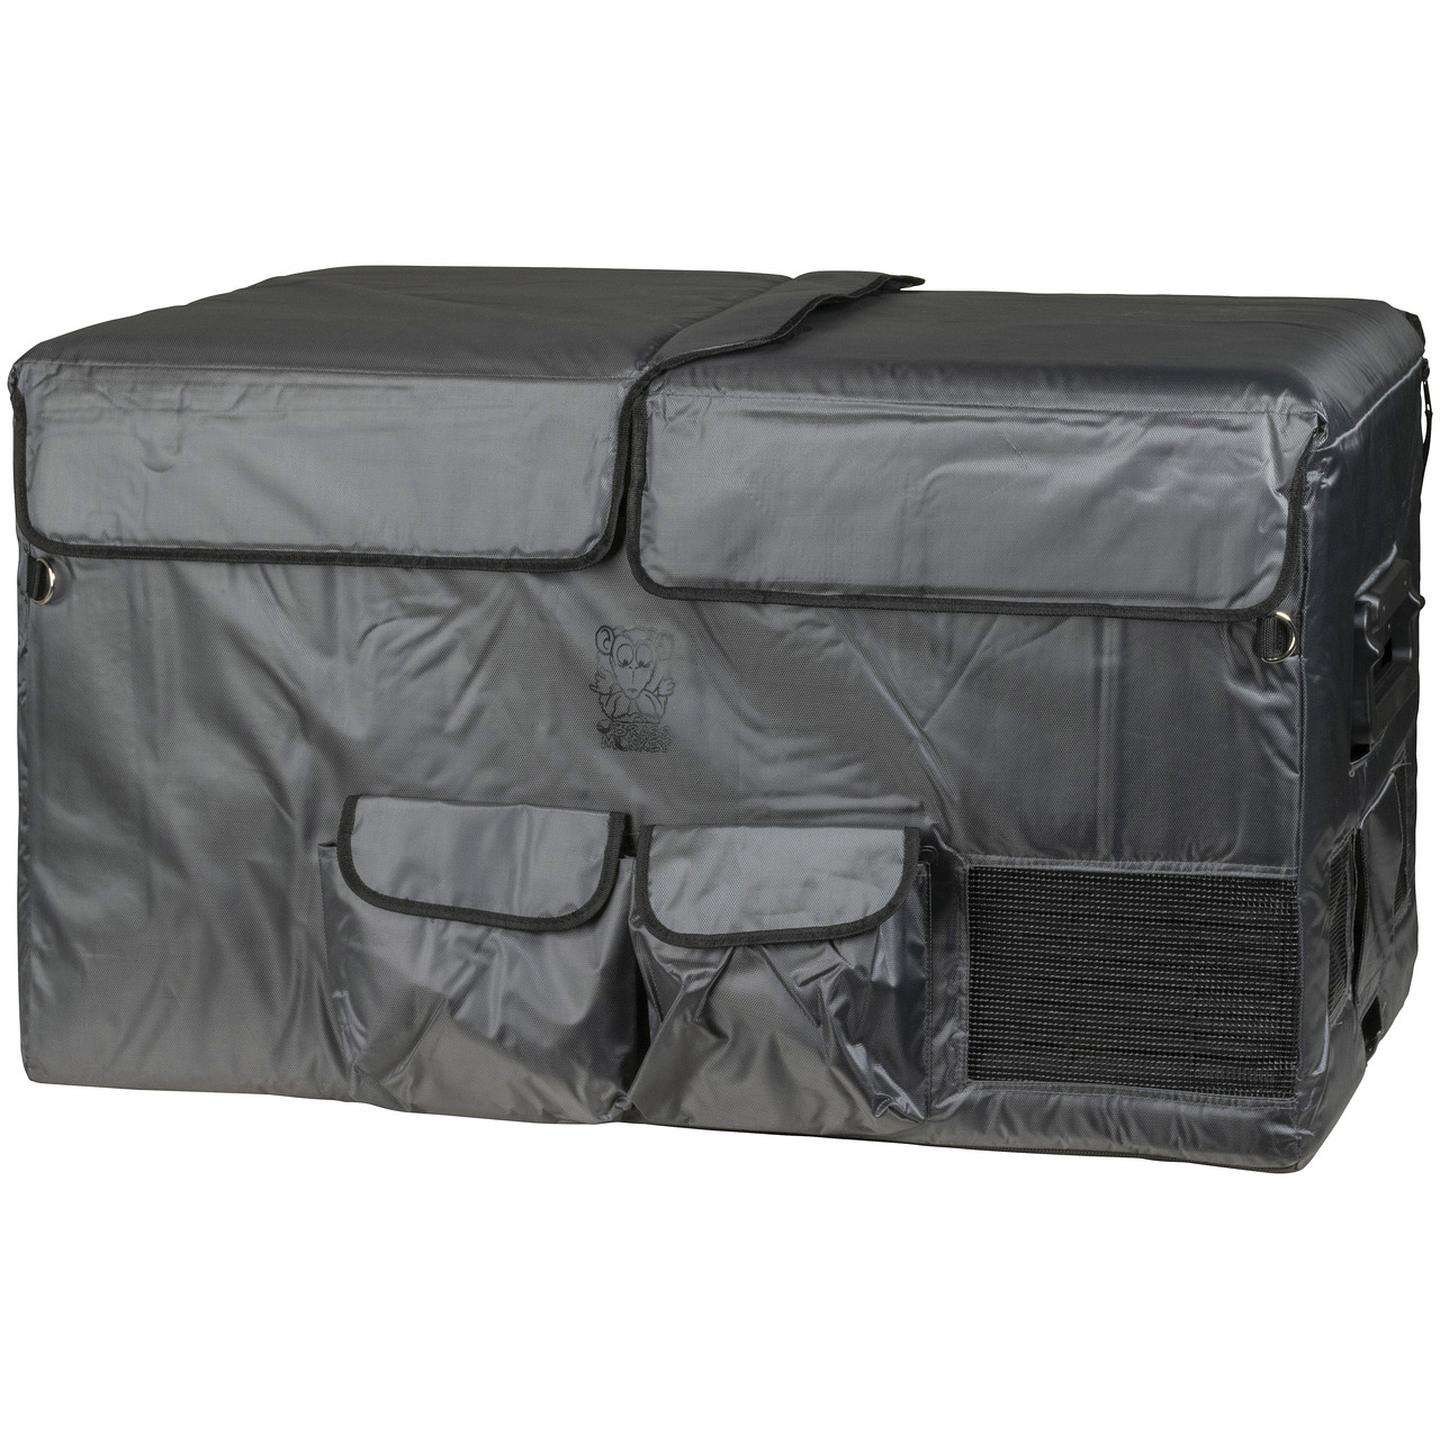 Grey Insulated Cover for 115L Brass Monkey Portable Fishing Fridge/Freezer